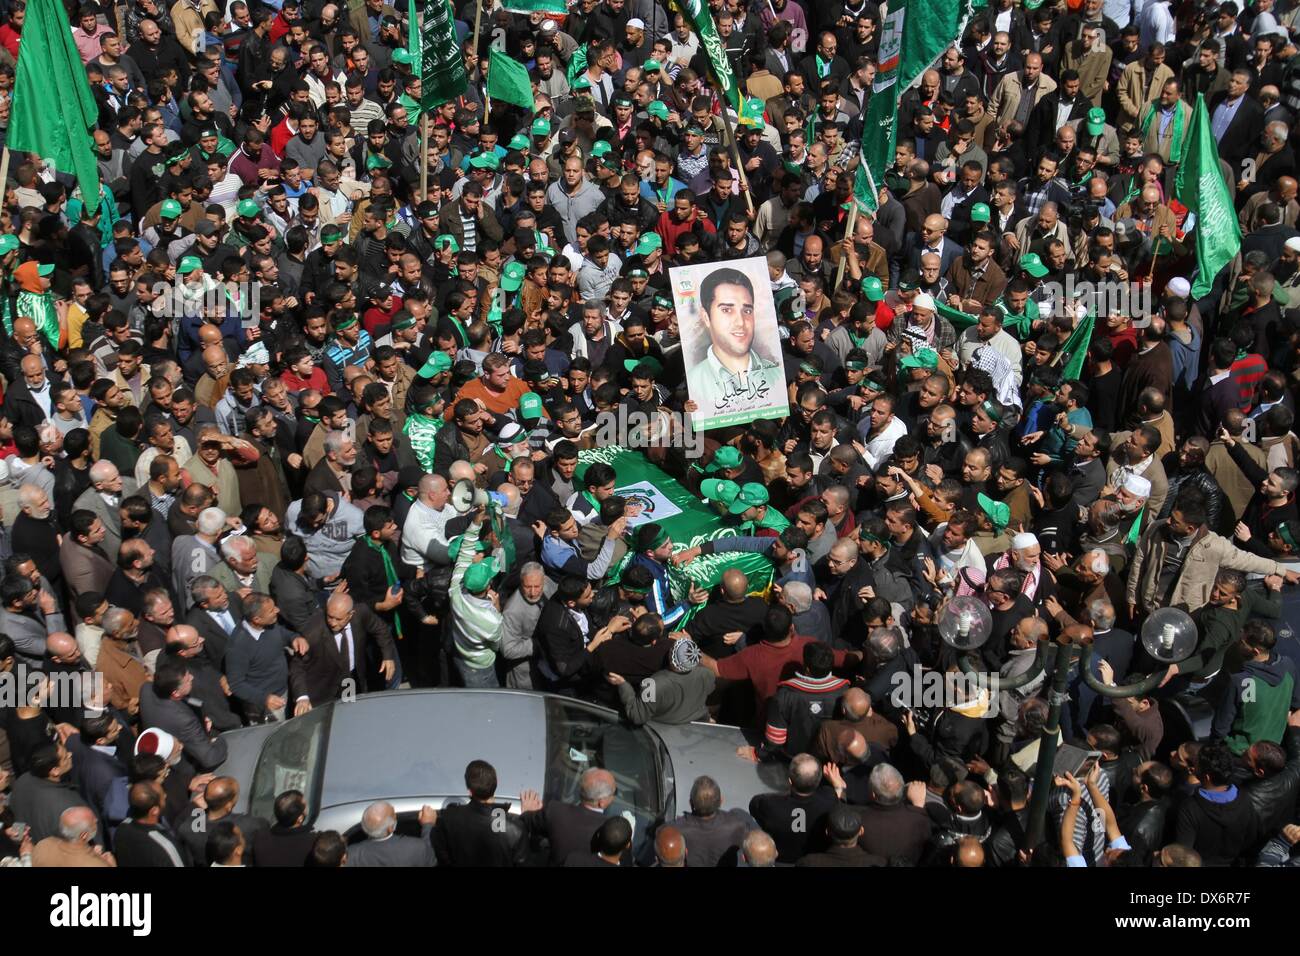 Nablus, West Bank, Palestinian Territory. 18th Mar, 2014. Palestinians carry a coffin containing the body of Palestinian militant Mohammed Hanbali who was killed 11 years ago during a funeral in the West Bank city of Nablus, March 19, 2014. Since the late 1960s, Israel has withheld the bodies of hundreds of Palestinians. Their bodies are interred in numbered, rather than named, graves in four cemeteries created for that purpose, the biggest of which is located in the Jordan Valley Credit:  Nedal Eshtayah/APA Images/ZUMAPRESS.com/Alamy Live News Stock Photo